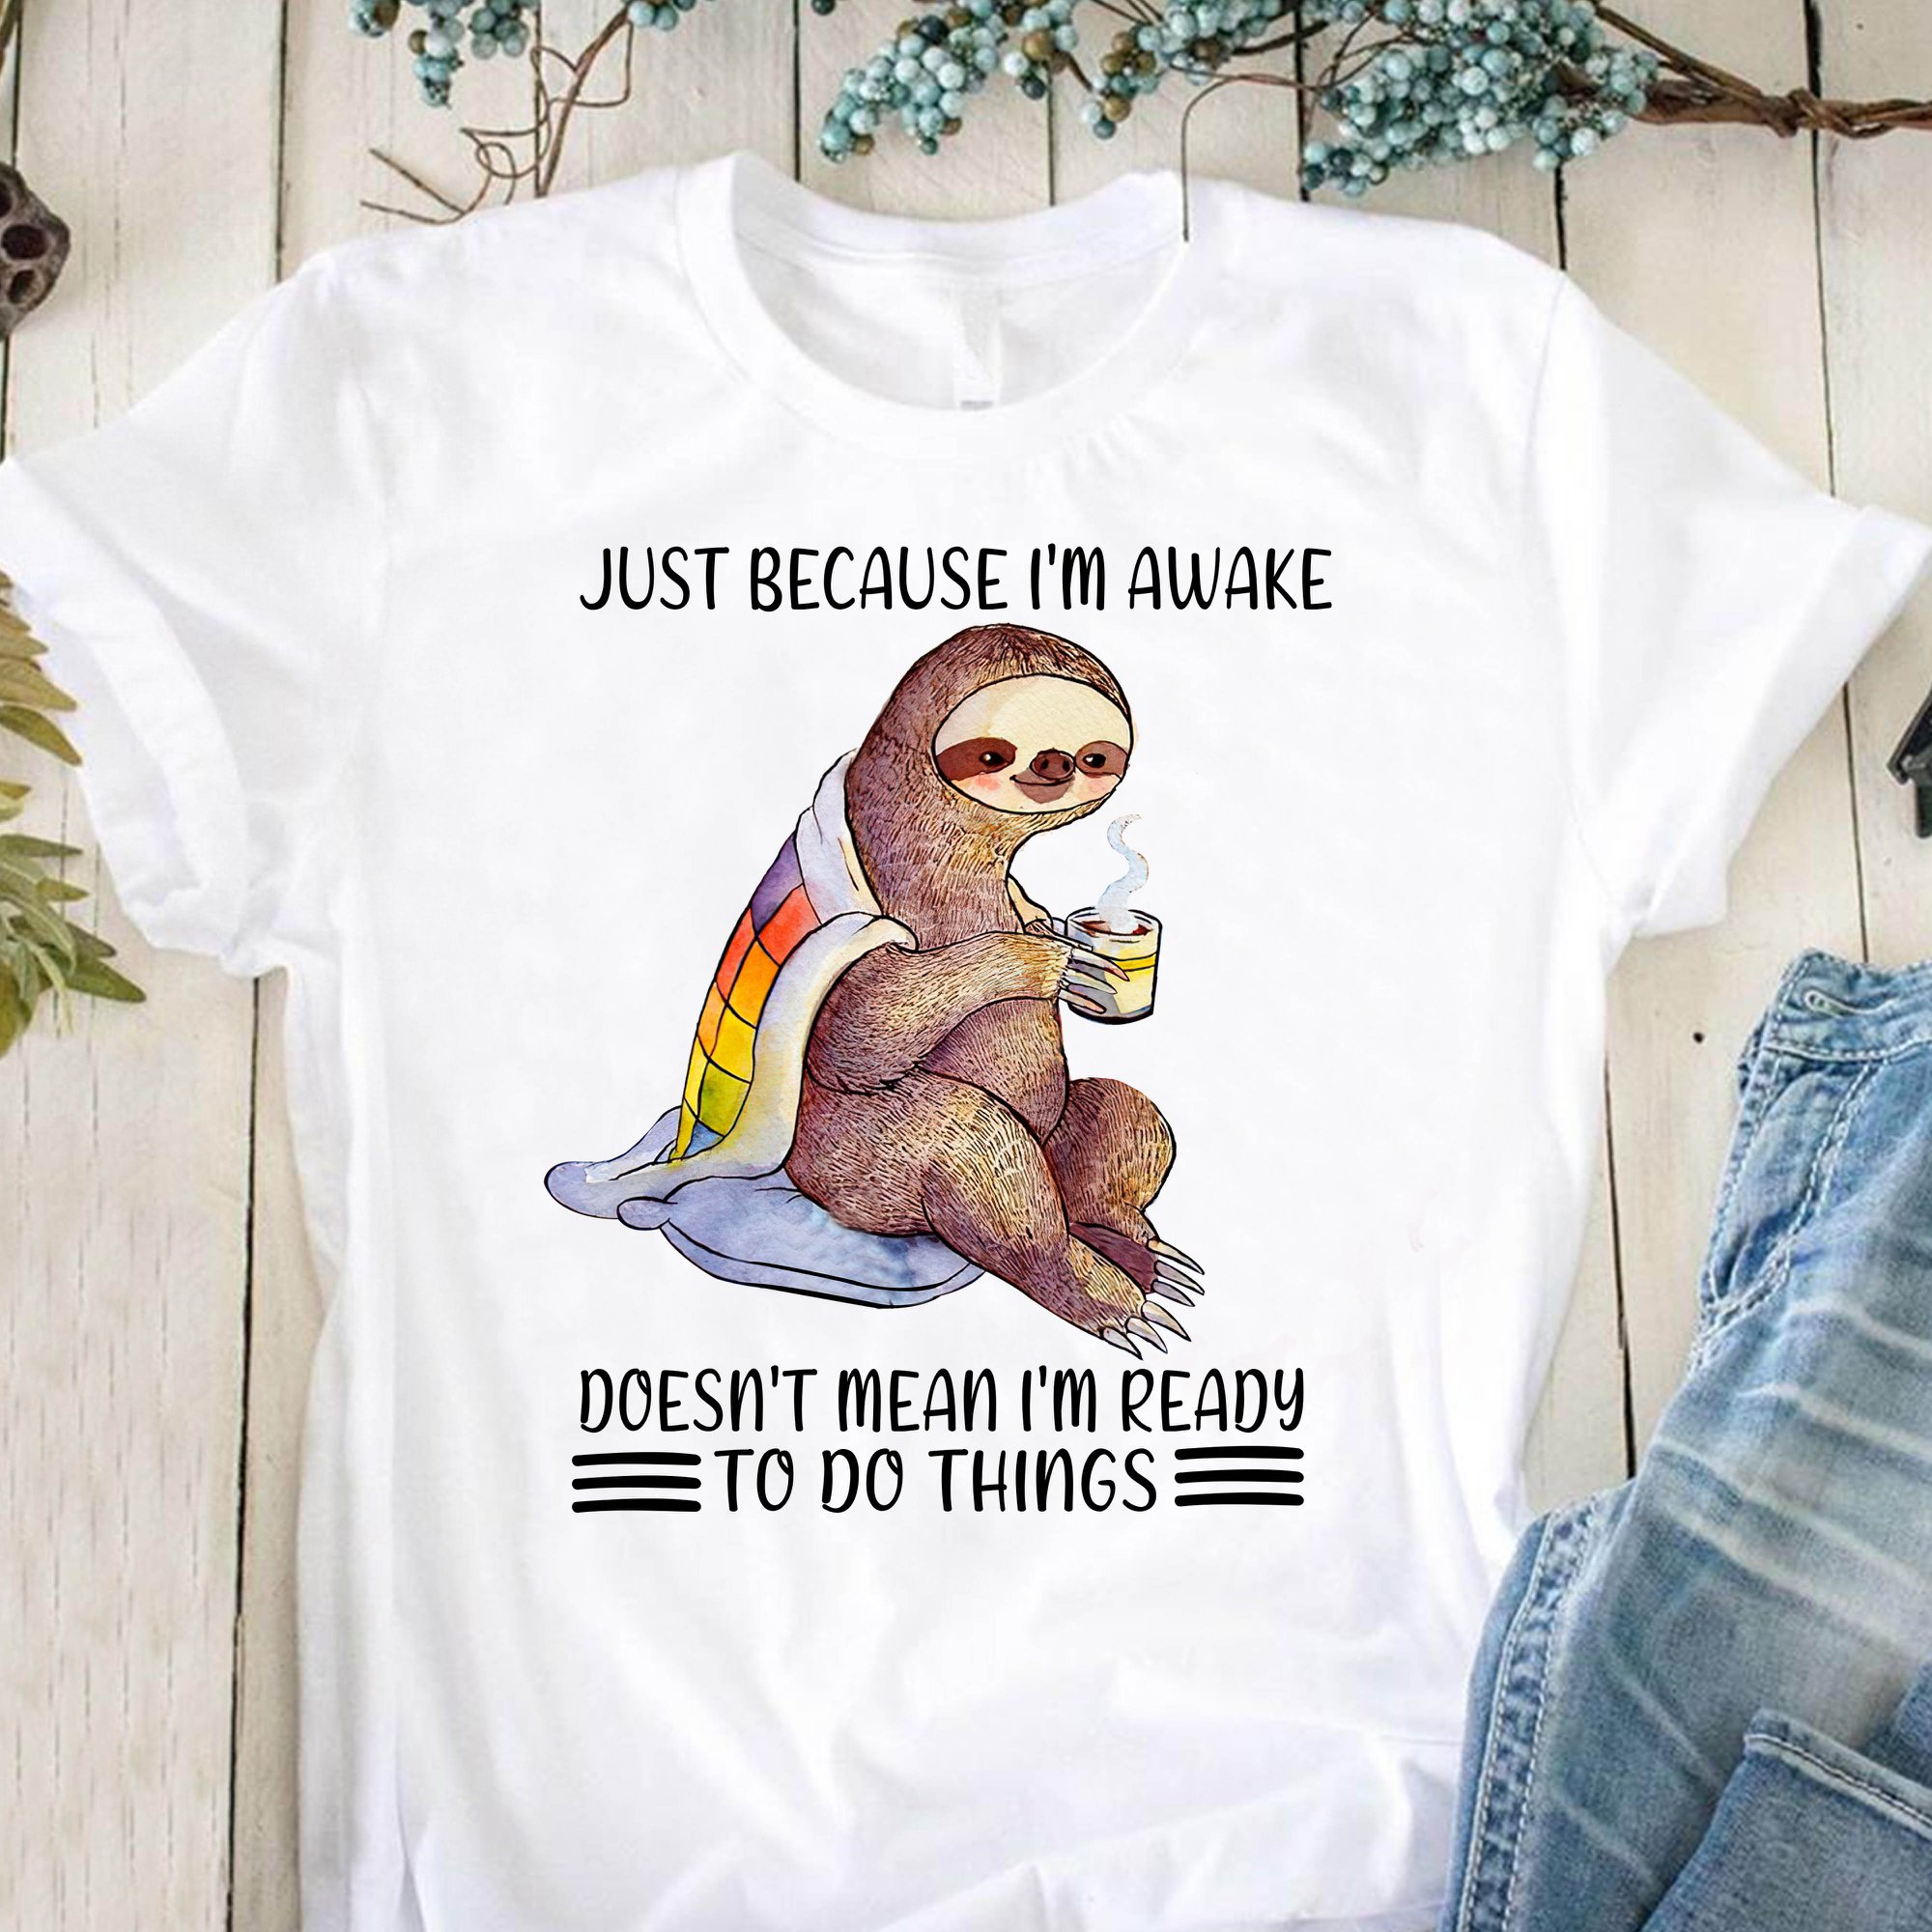 Just because I'm awake doesn't mean I'm ready to do things - Sloth and coffee